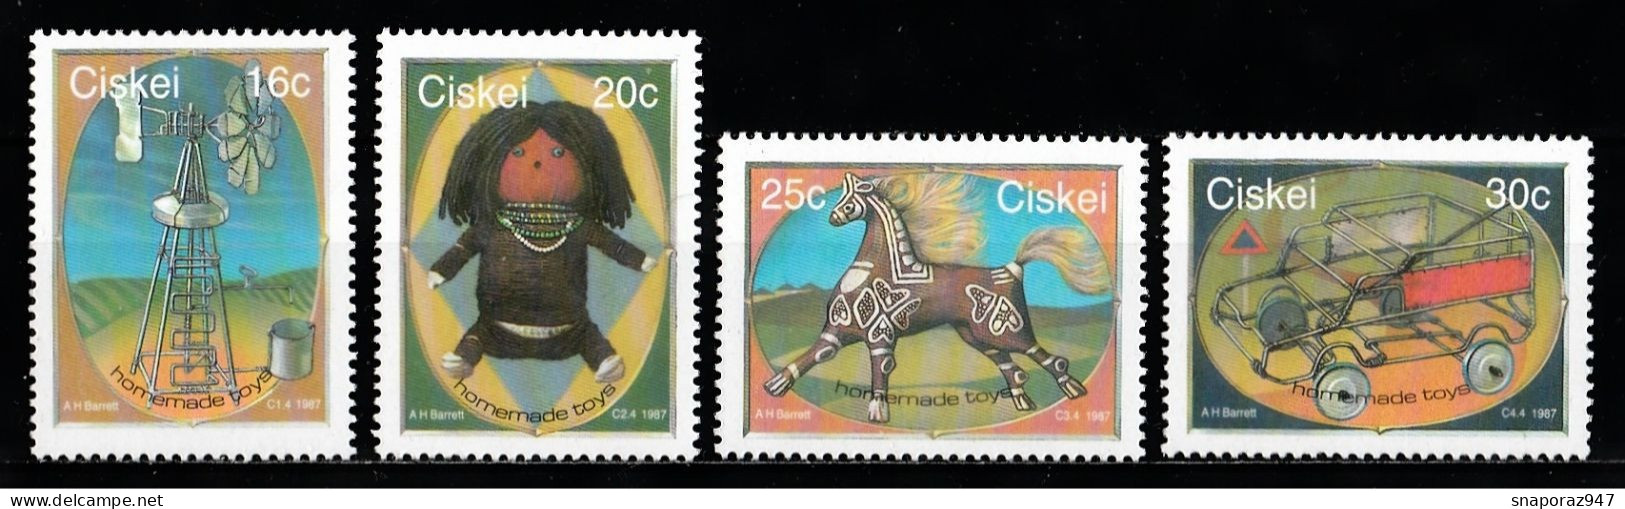 1987 Ciskei Handcrafted Toys Set MNH** Ab236 - Poppen